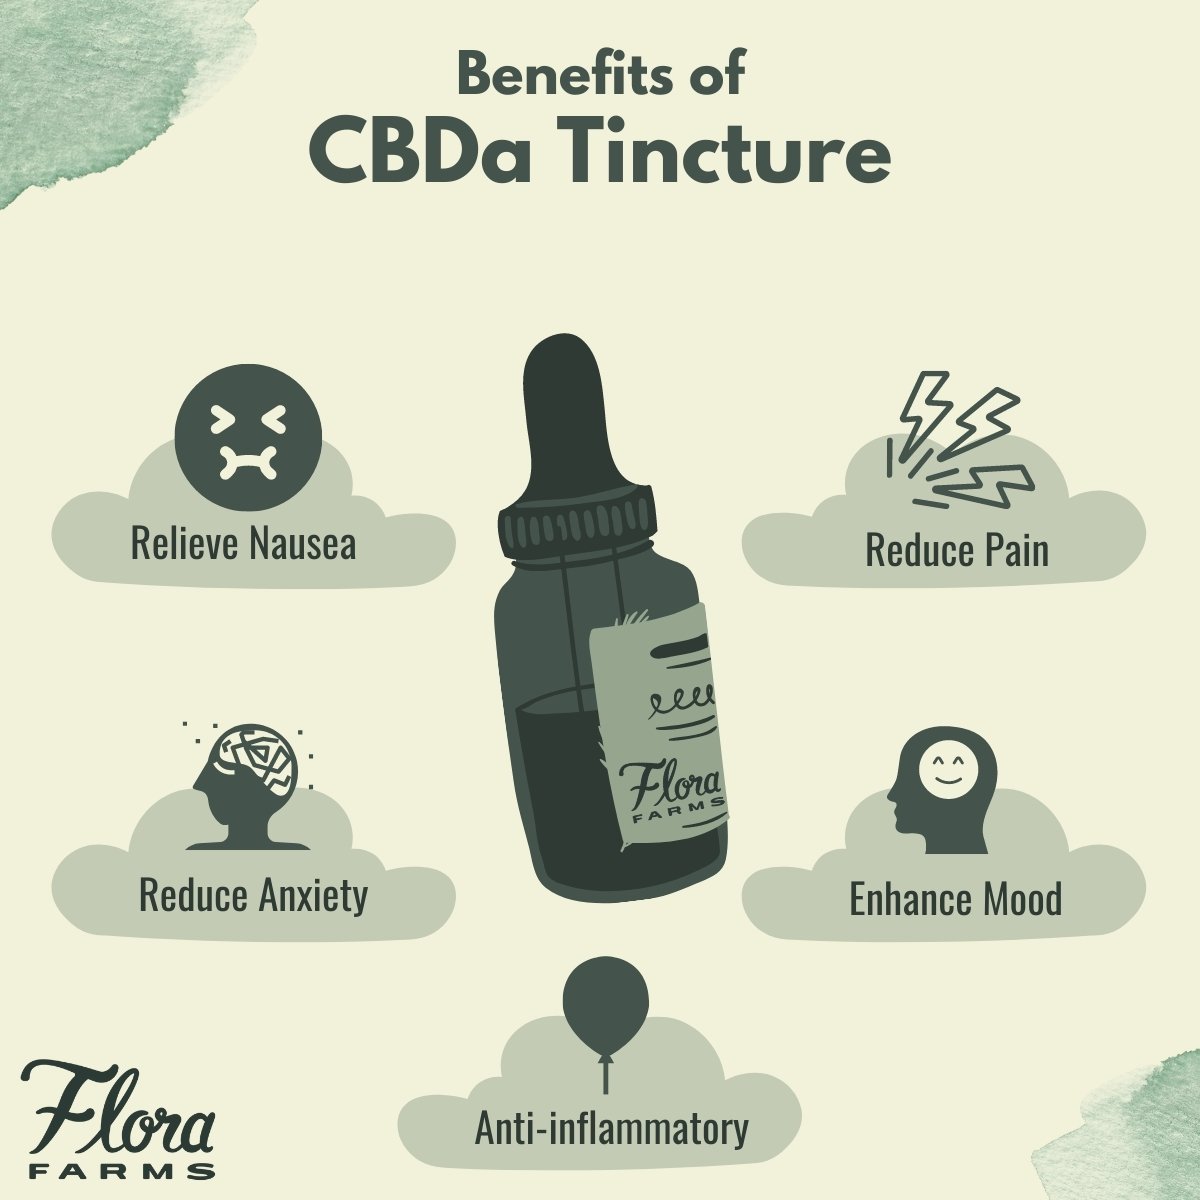 Infographic about the benefits of CBDA